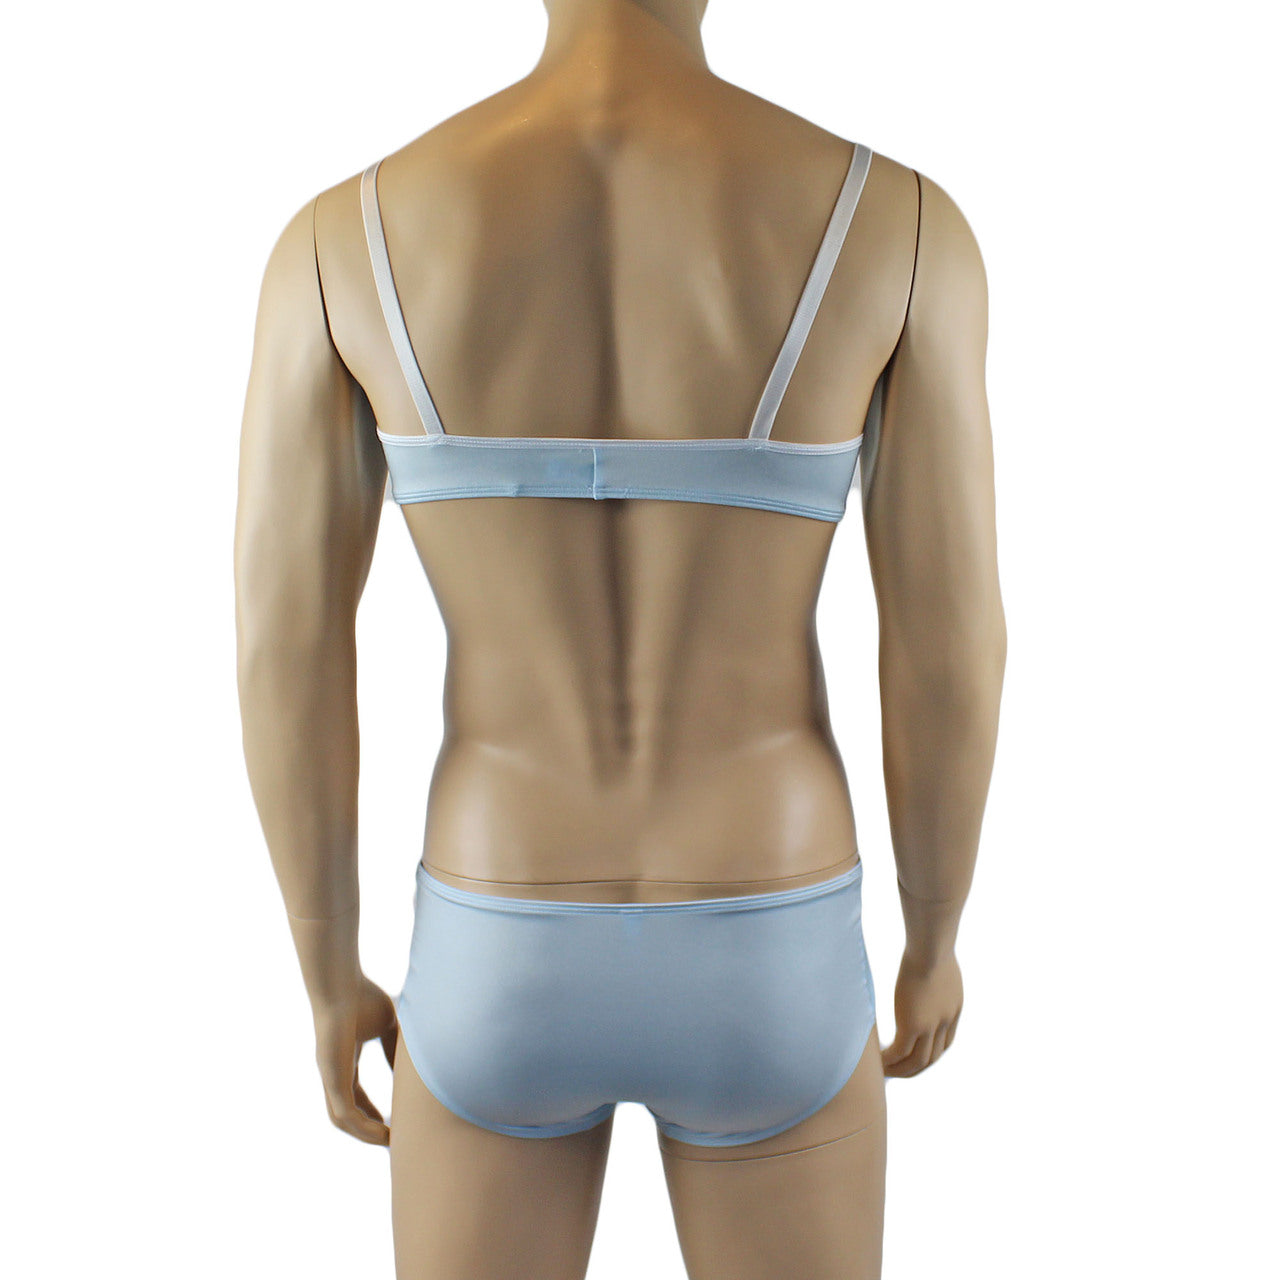 Mens Luxury Bra Top and Boxer Brief with Garters & Stockings (light blue plus other colours)